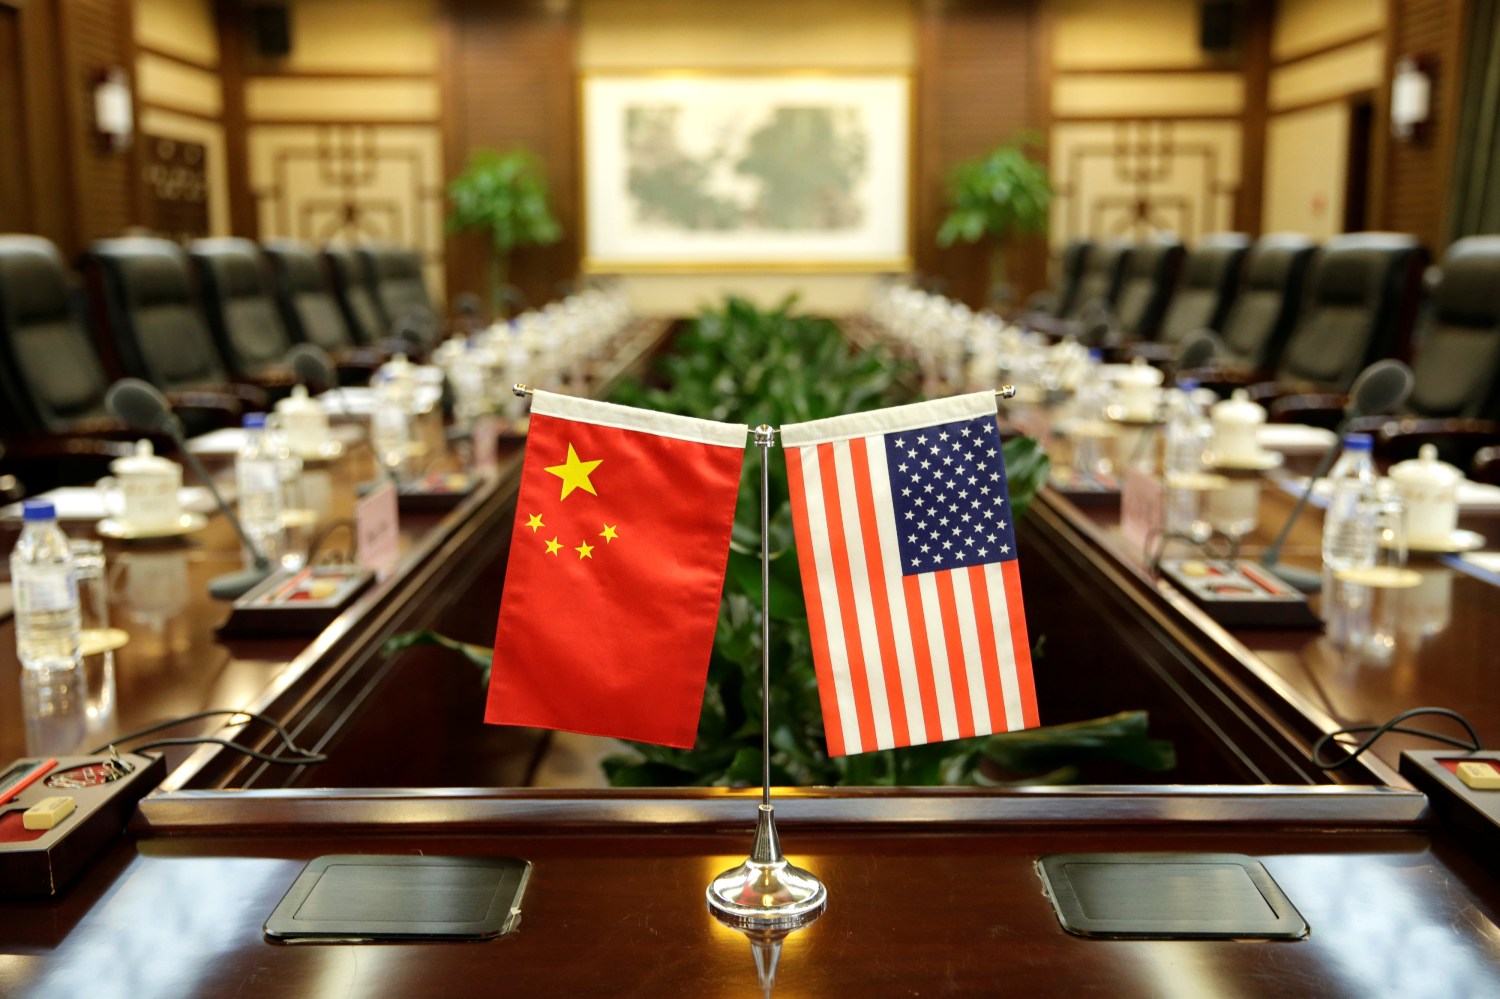 Flags of U.S. and China are placed for a meeting between Secretary of Agriculture Sonny Perdue and China's Minister of Agriculture Han Changfu at the Ministry of Agriculture in Beijing, China June 30, 2017.